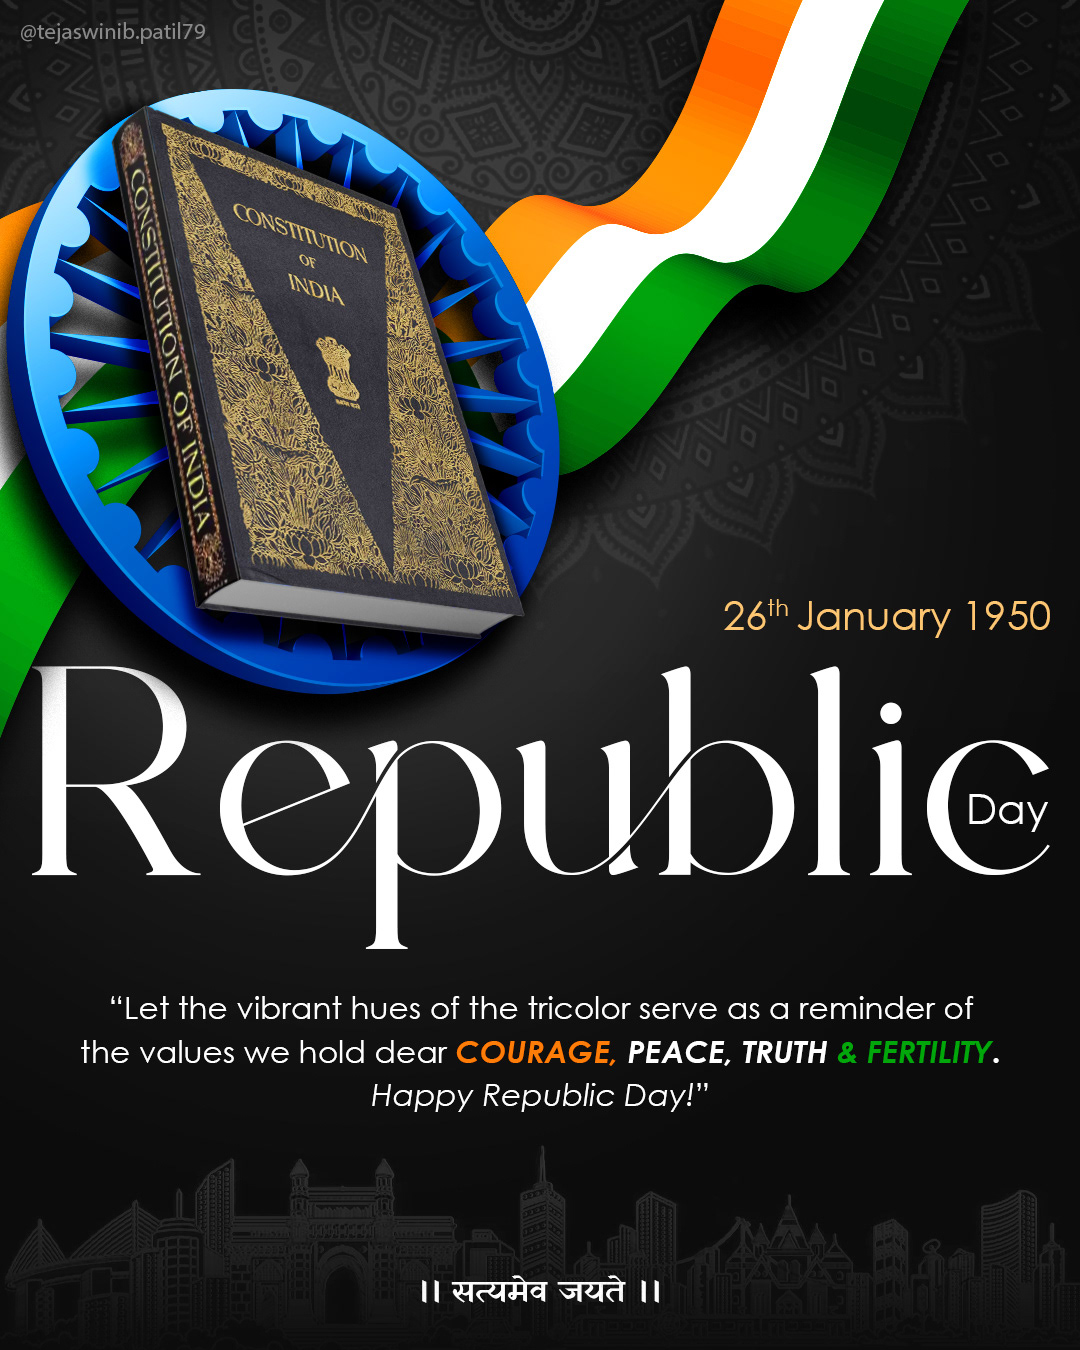 republic day Republic Day of INDIA India Constitution Social media post tricolor 26 january Satyamev jayate 26 January 1950 Constitution of India